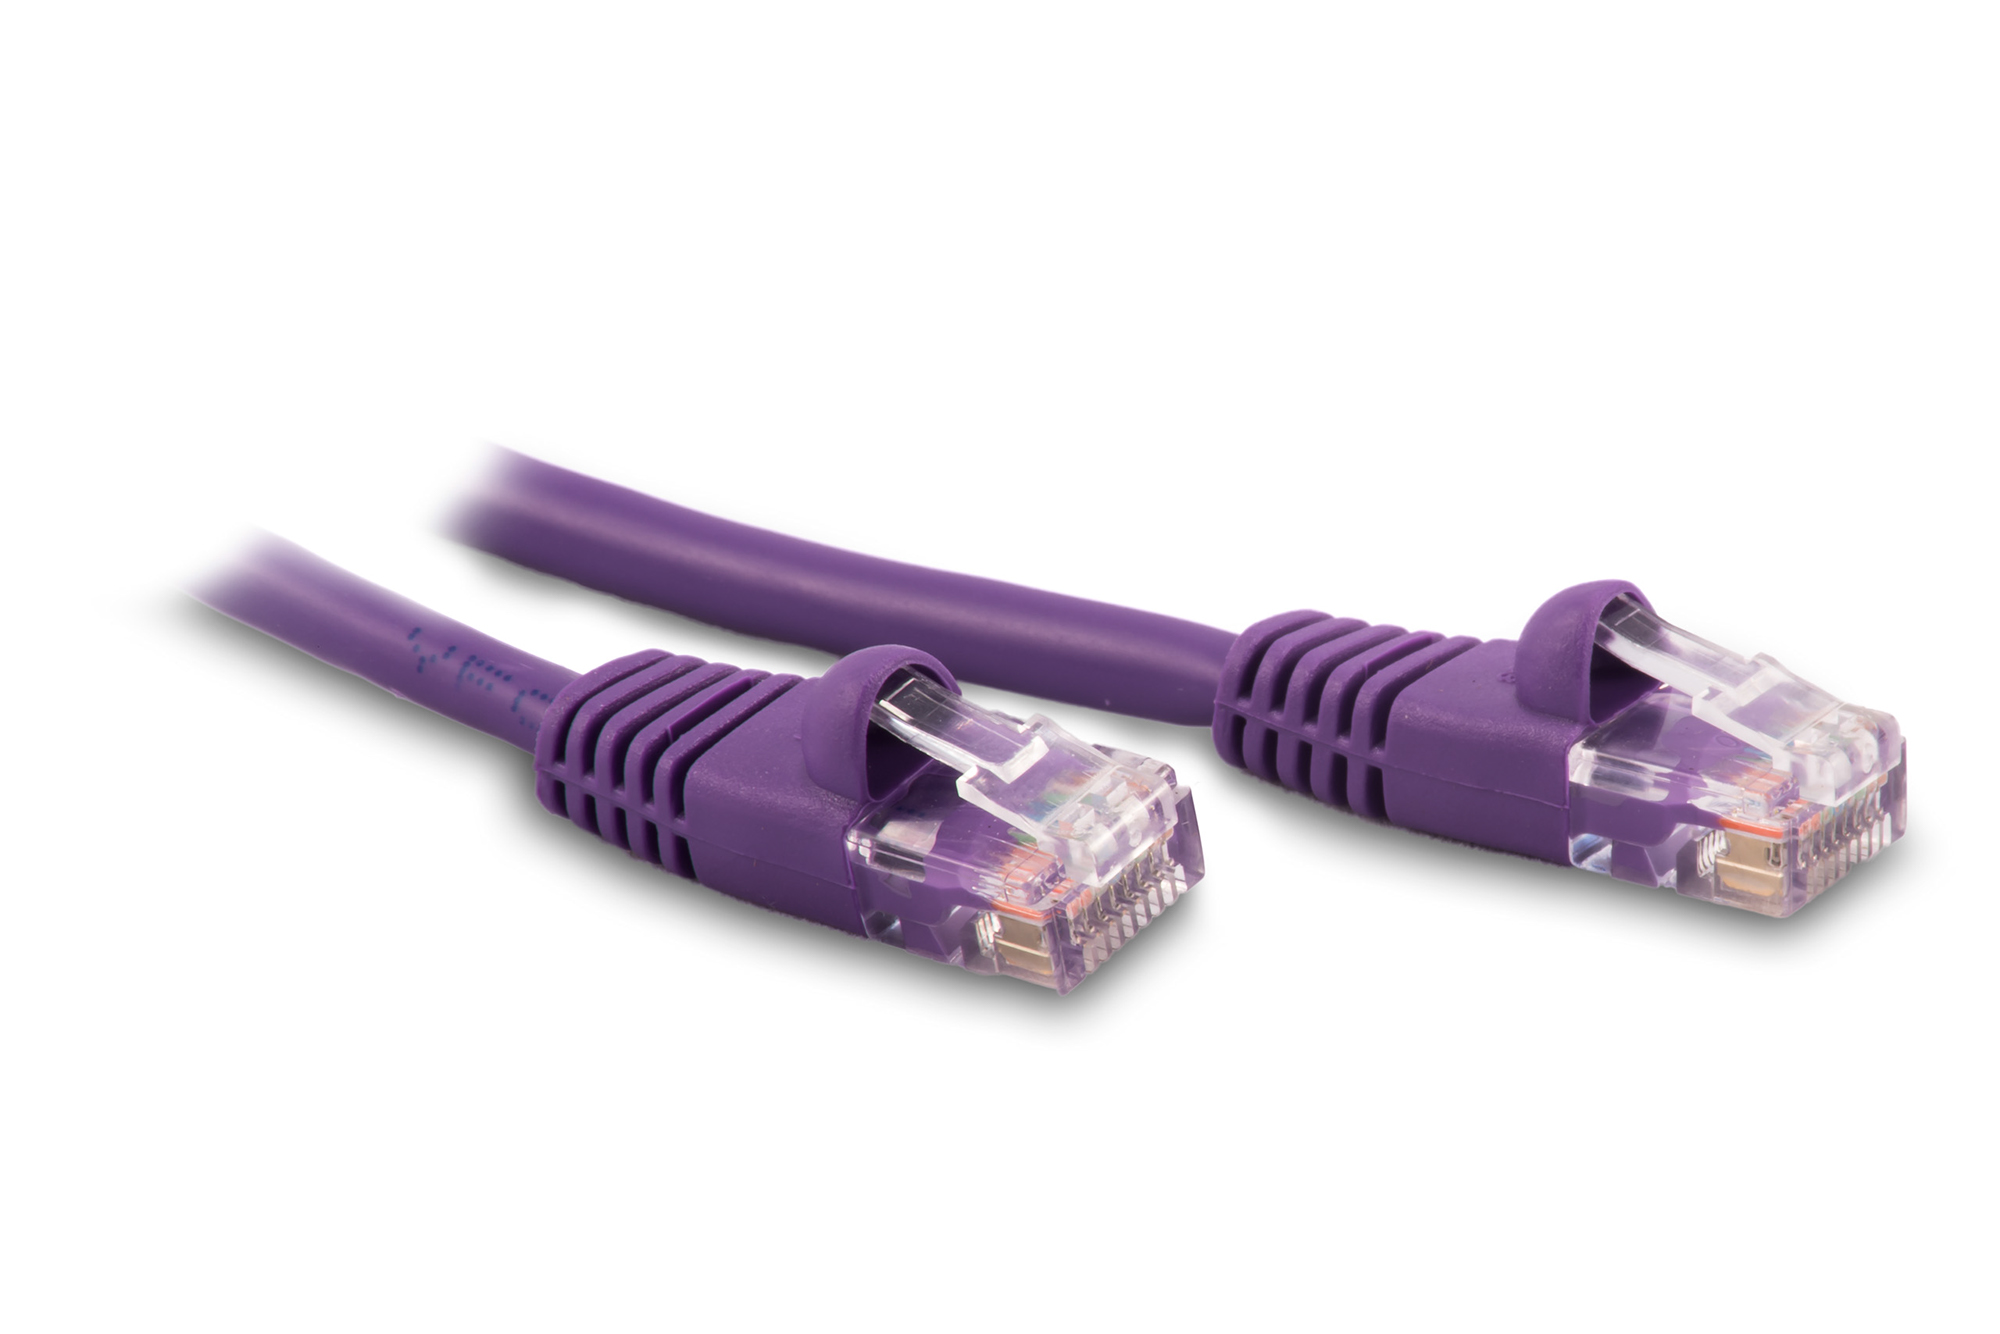 30ft Cat5e Ethernet Patch Cable - Violet Color - Snagless Boot